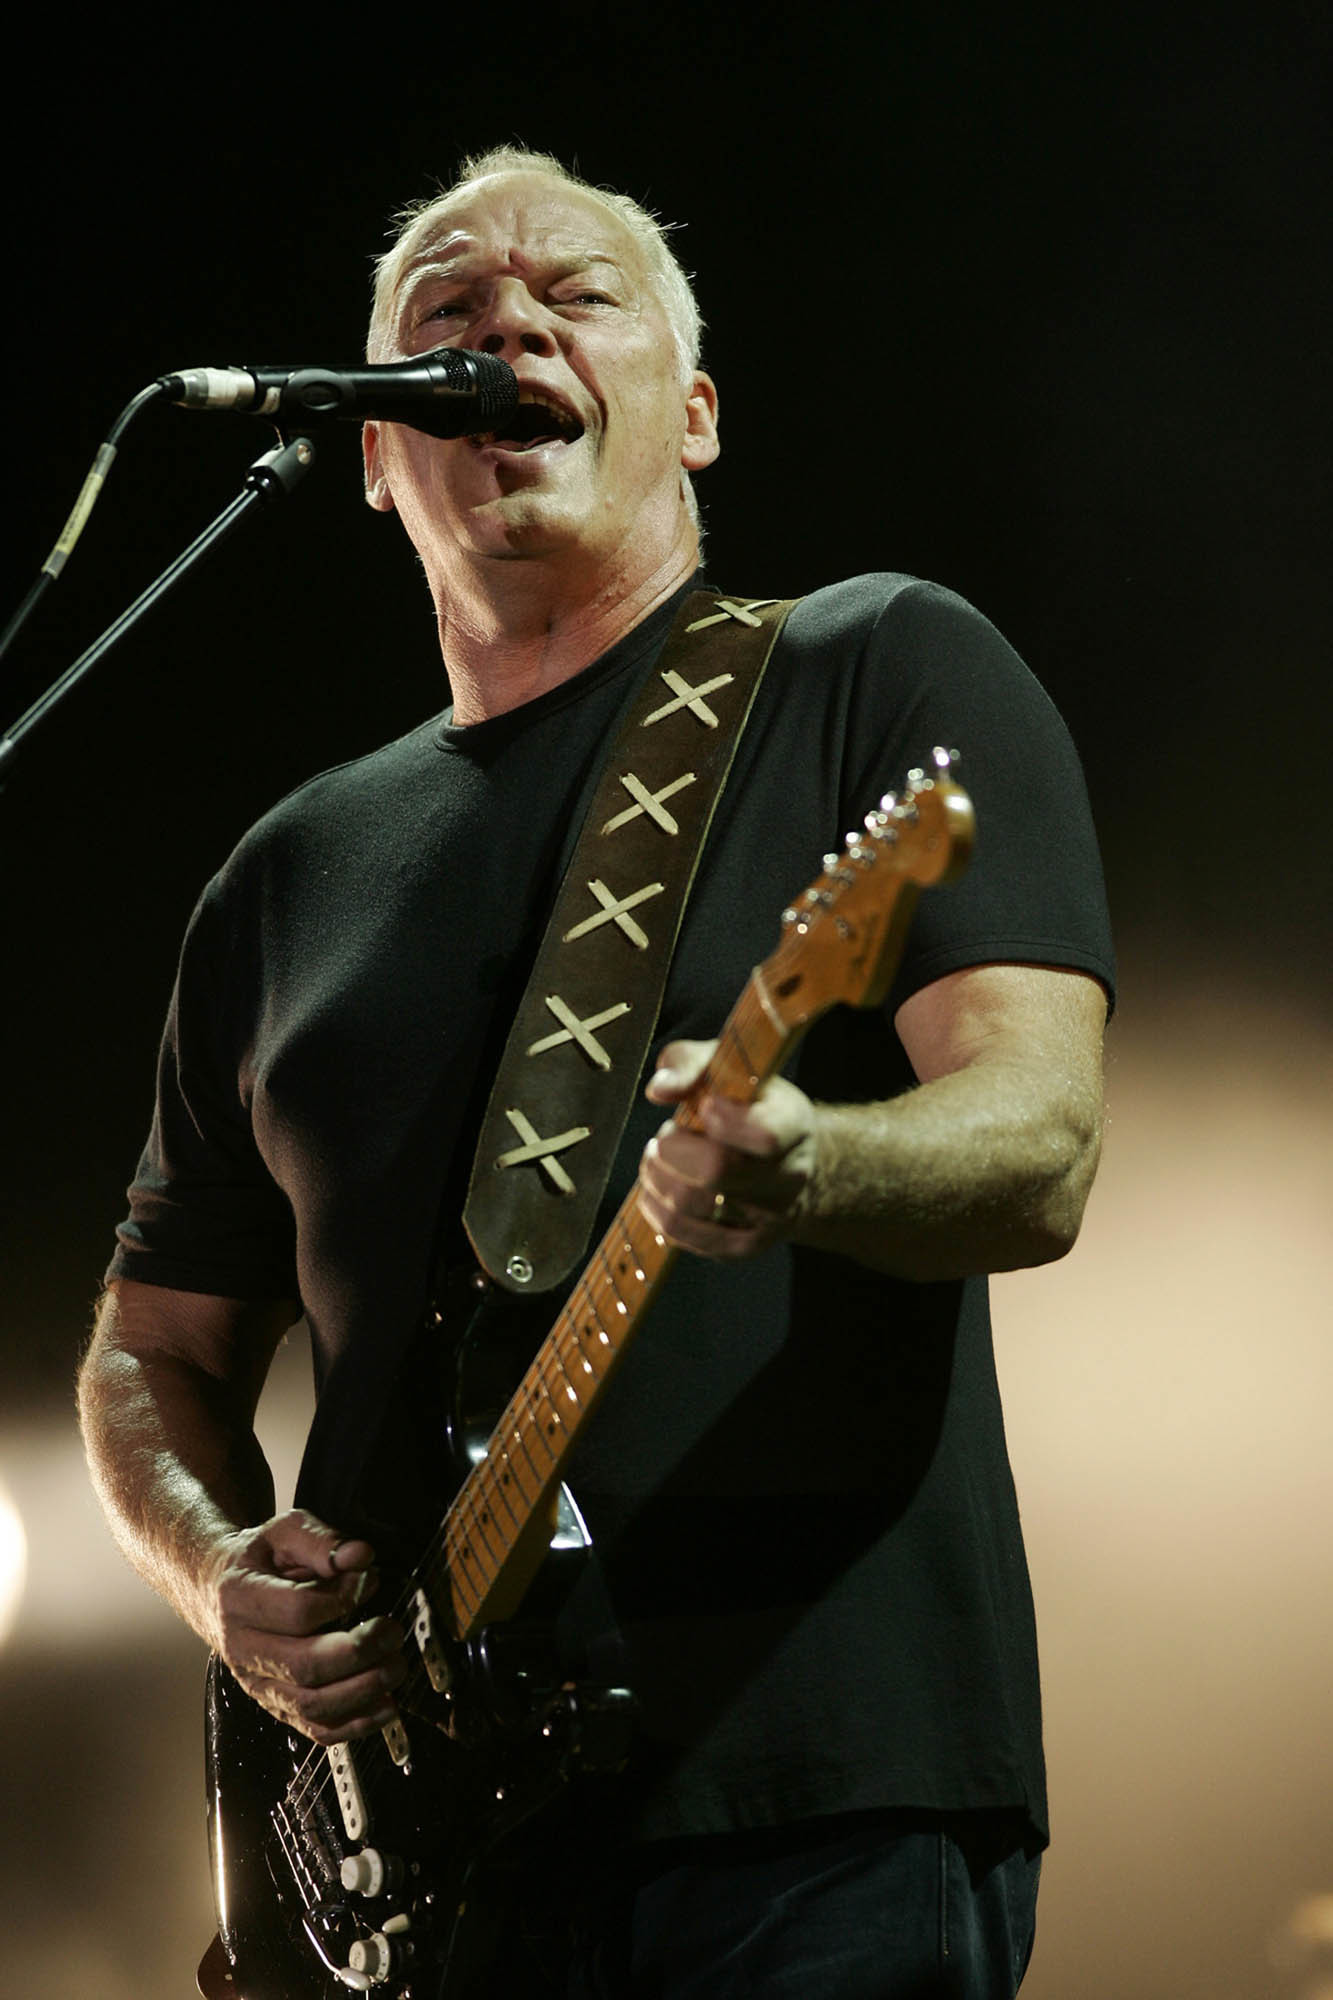 British rock musician and Pink Floyd frontman David Gilmour performs at the Gdansk shipyard in Gdansk, northern Poland, Saturday, Aug. 26, 2006. The concert marked the 26th anniversary of Solidarity, the trade union that overthrew communism in Poland.